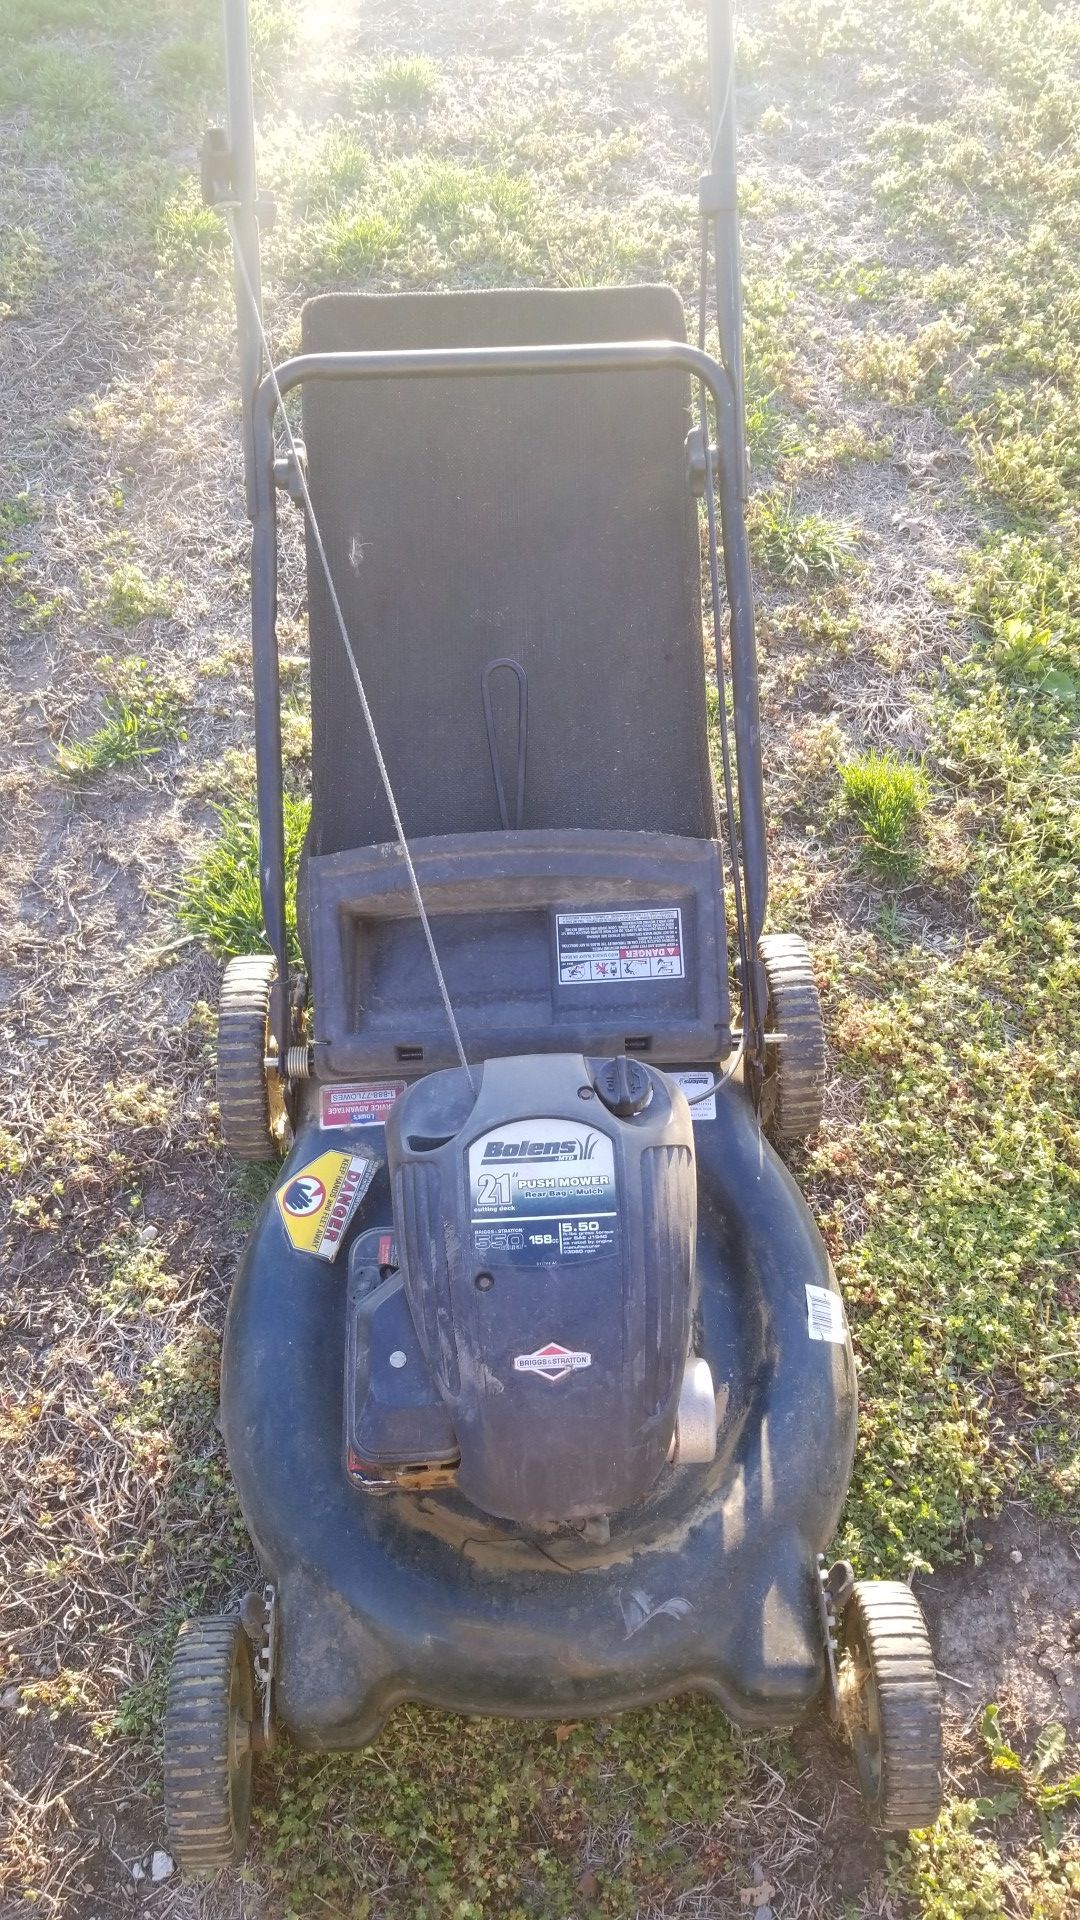 21" mower with bagger